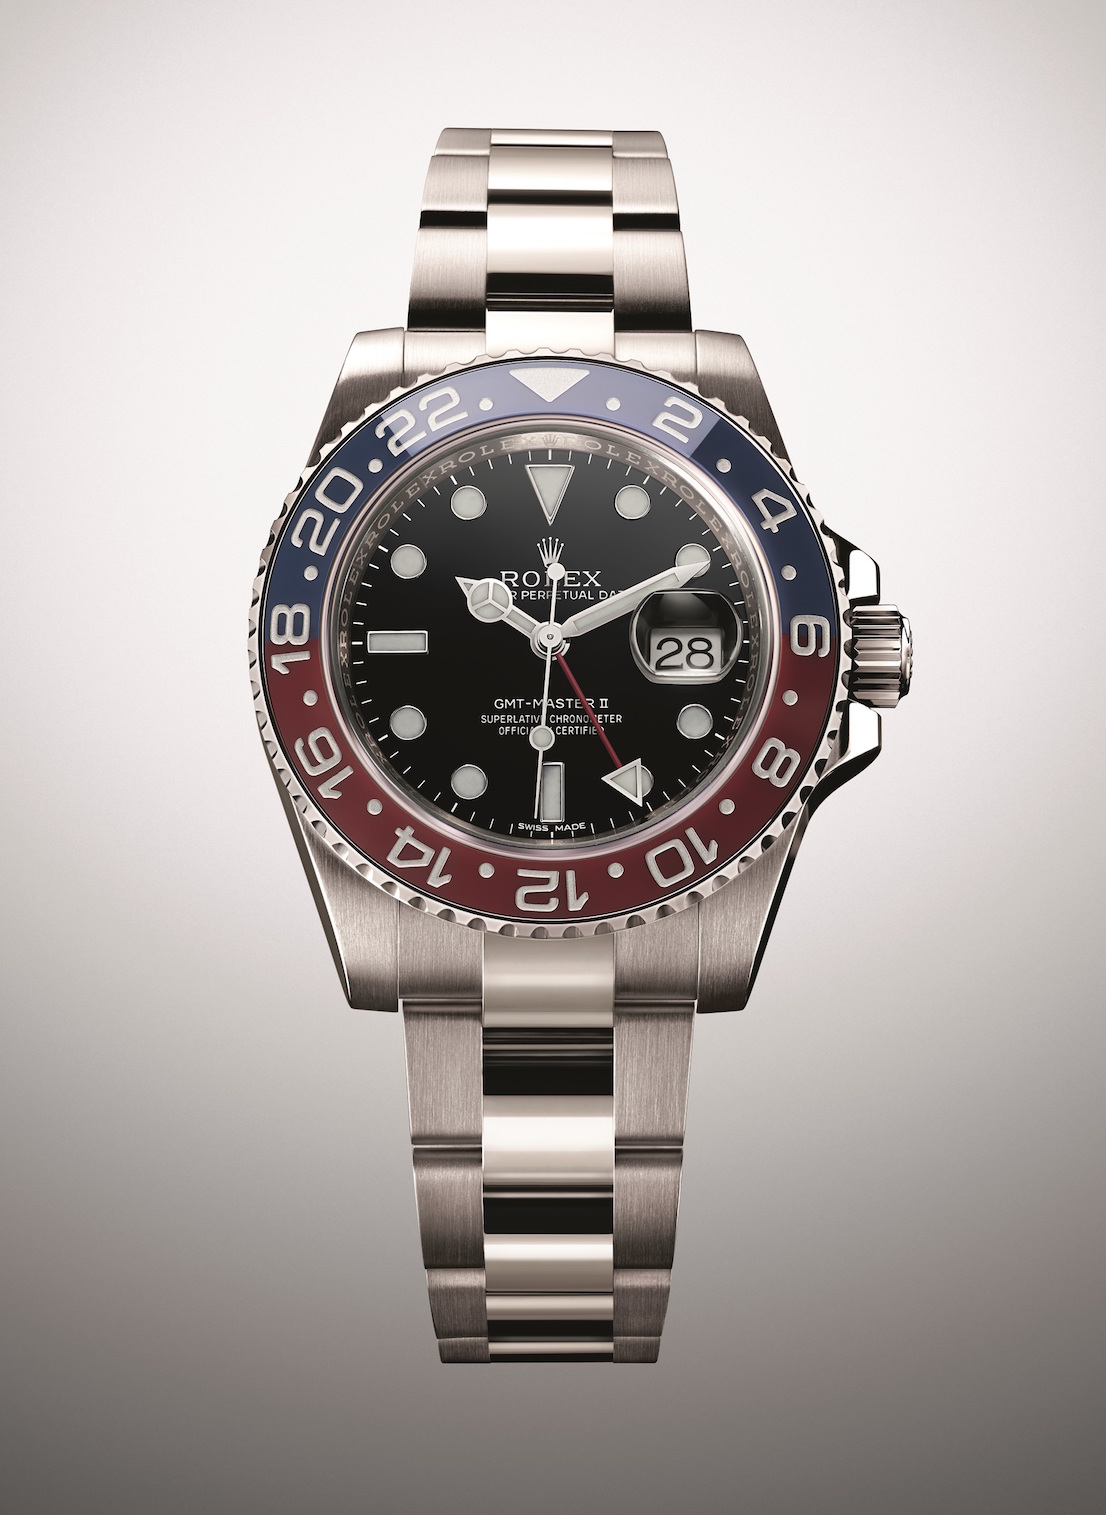 Oyster Perpetual GMT-Master II, Rolex.